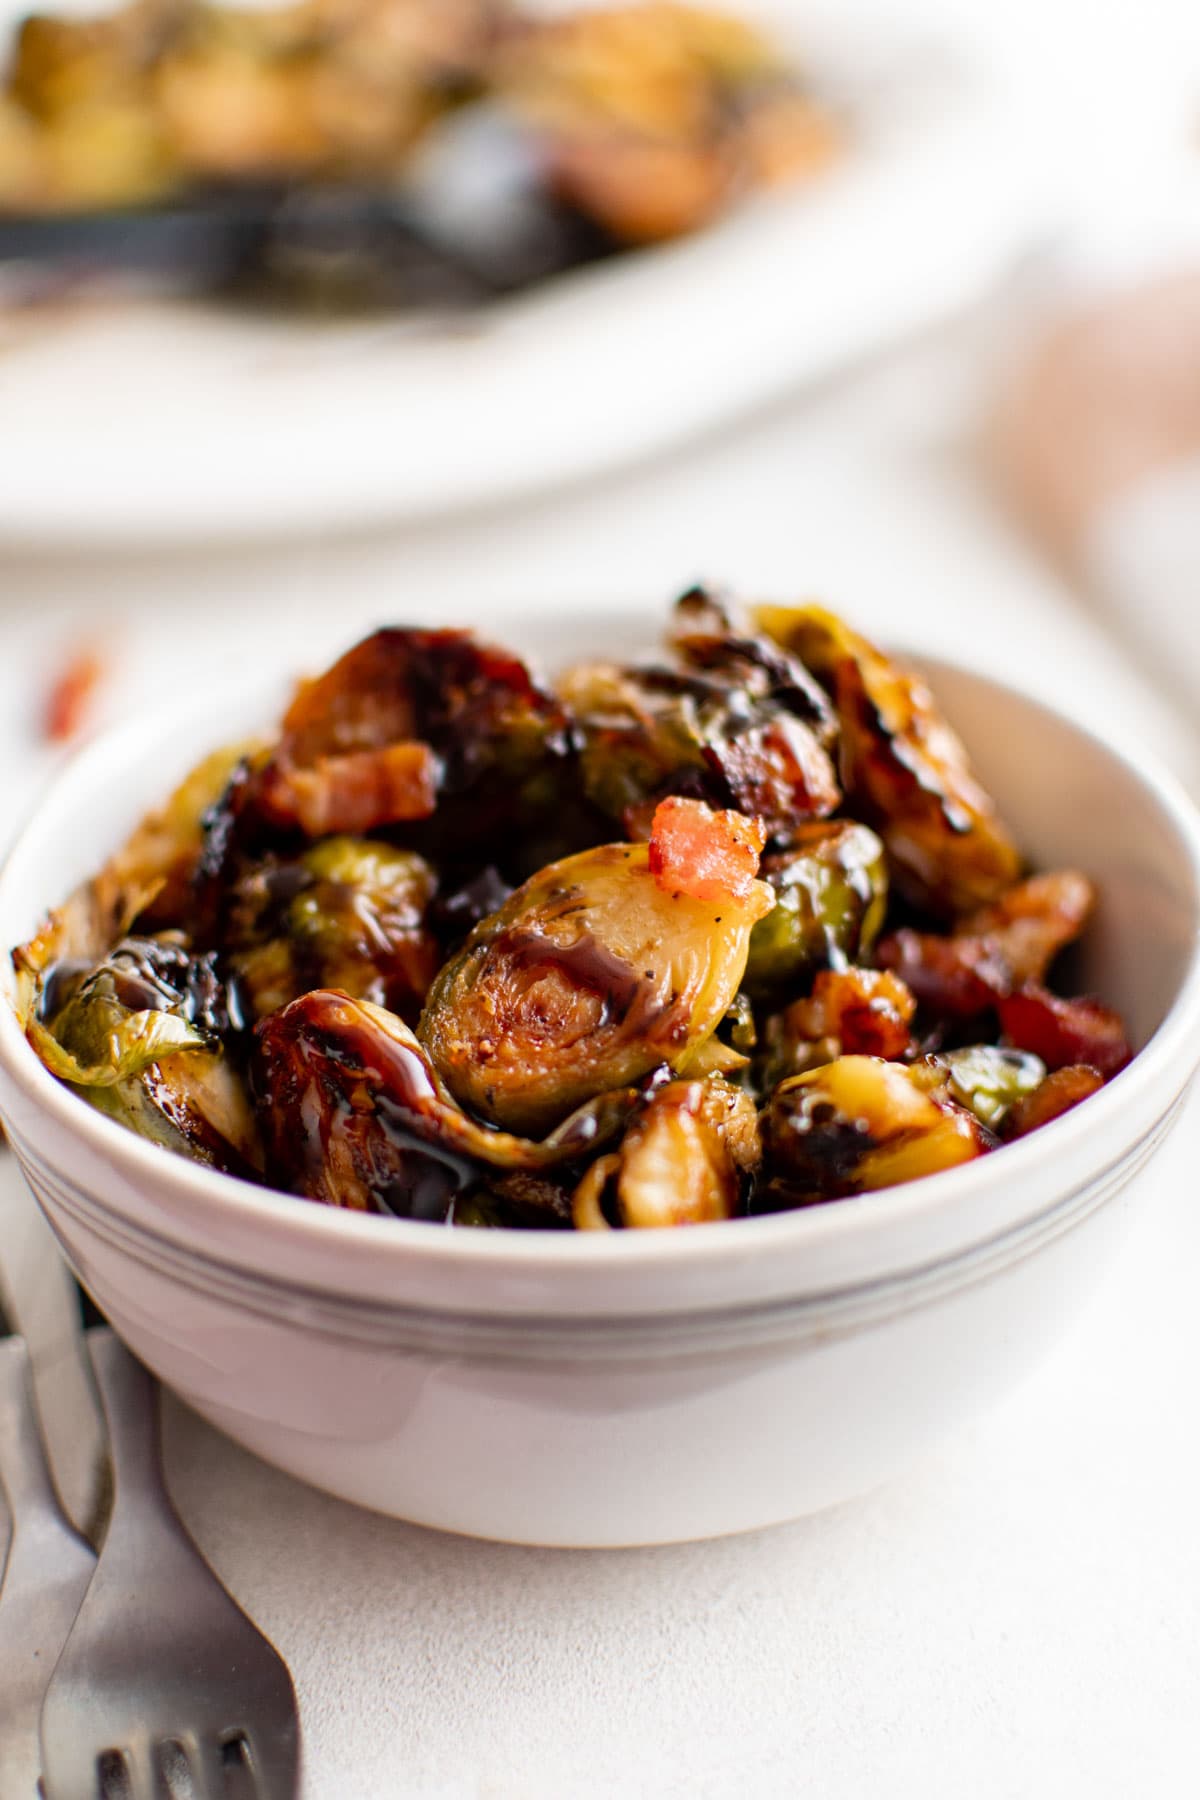 Small bowl of brussels sprouts with bacon.